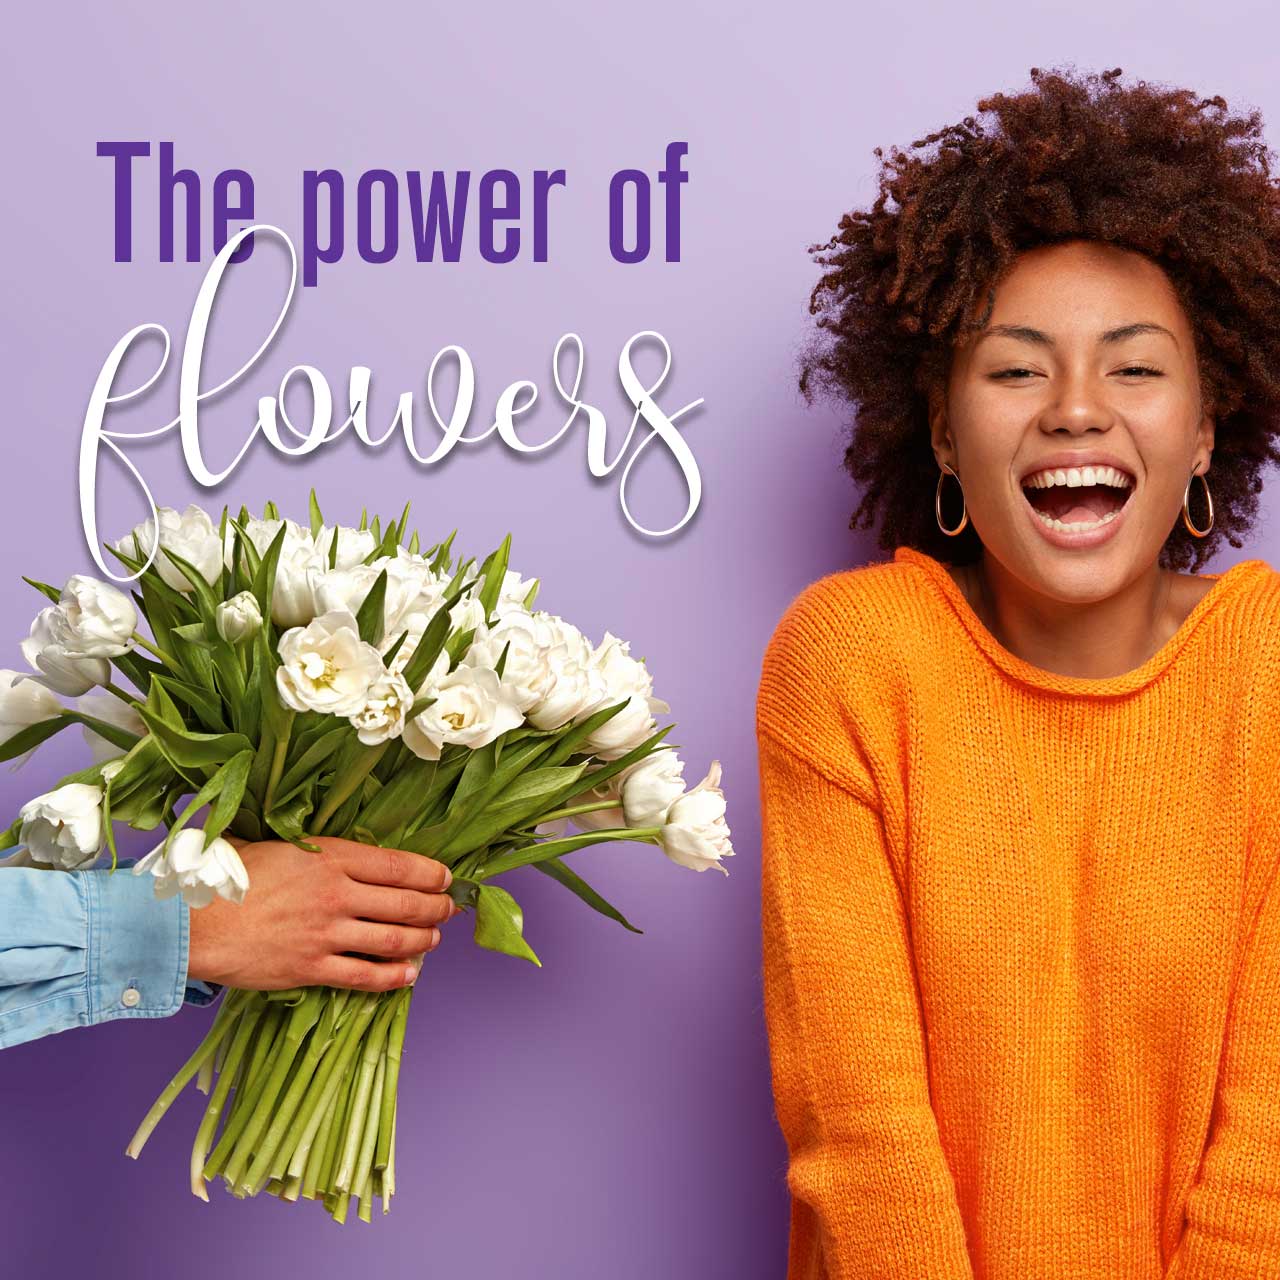 The power of flowers.